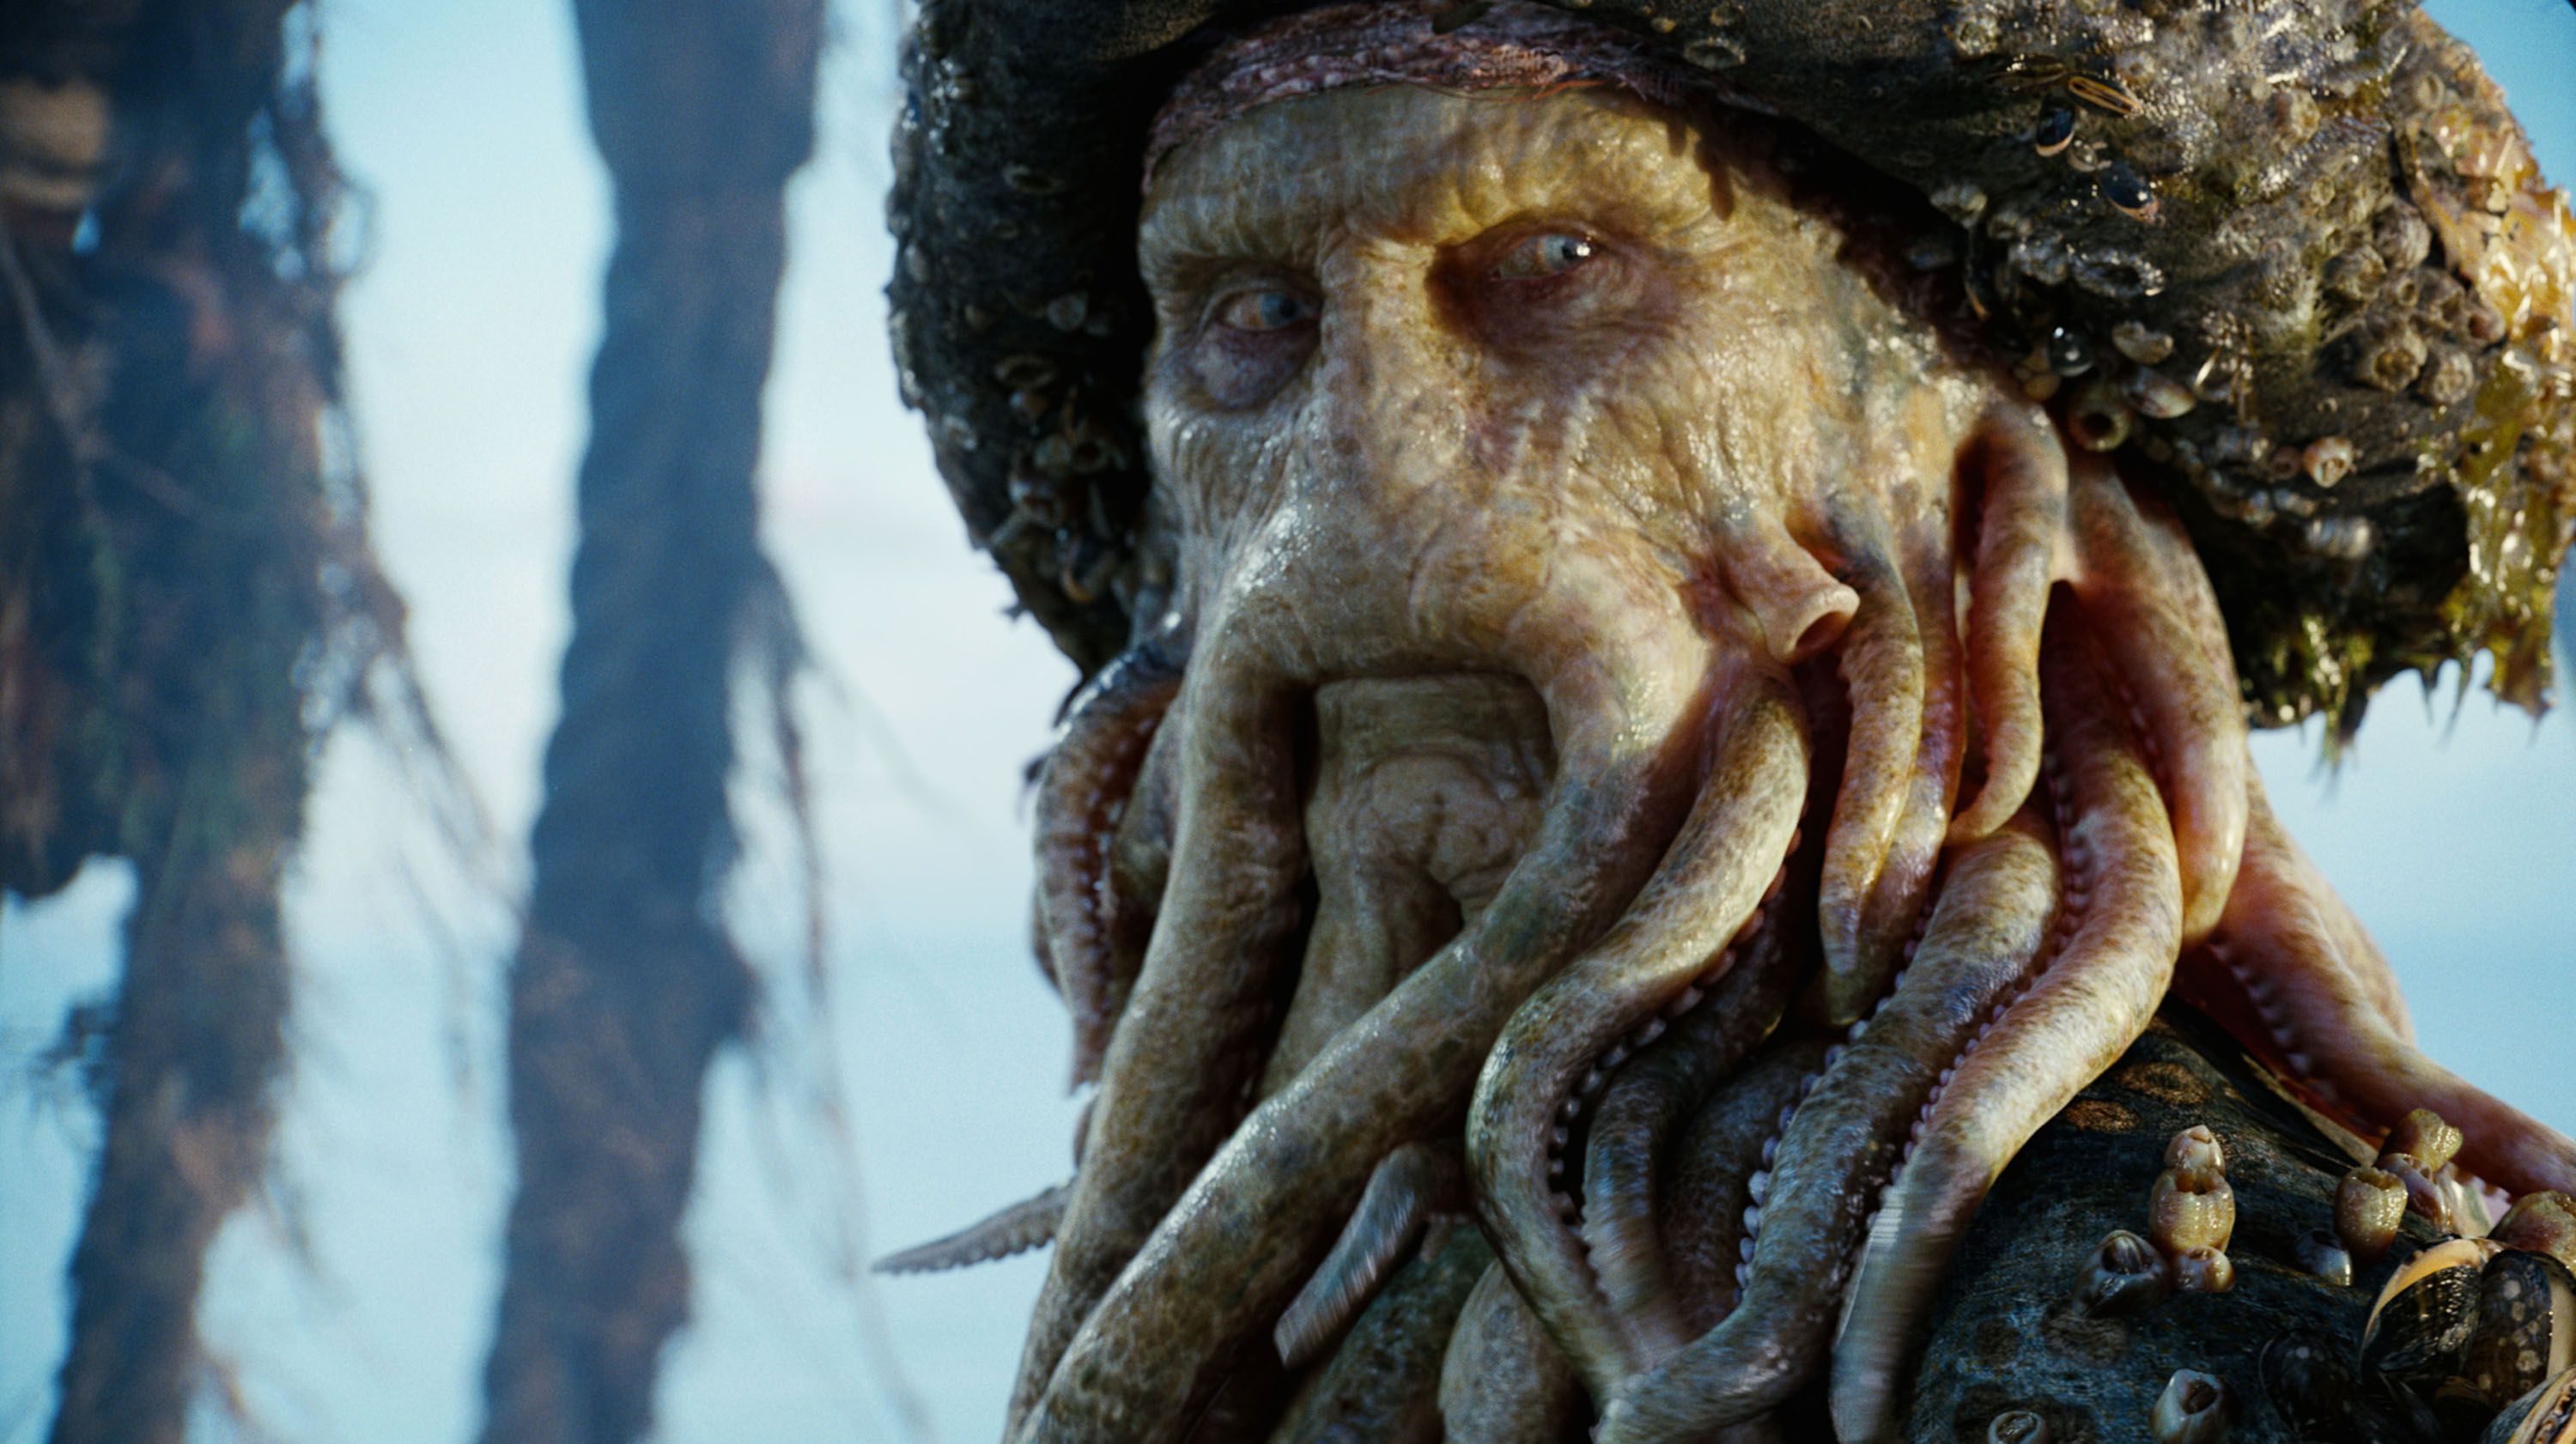 Pirates of the Caribbean villains: the 8 best baddies, ranked